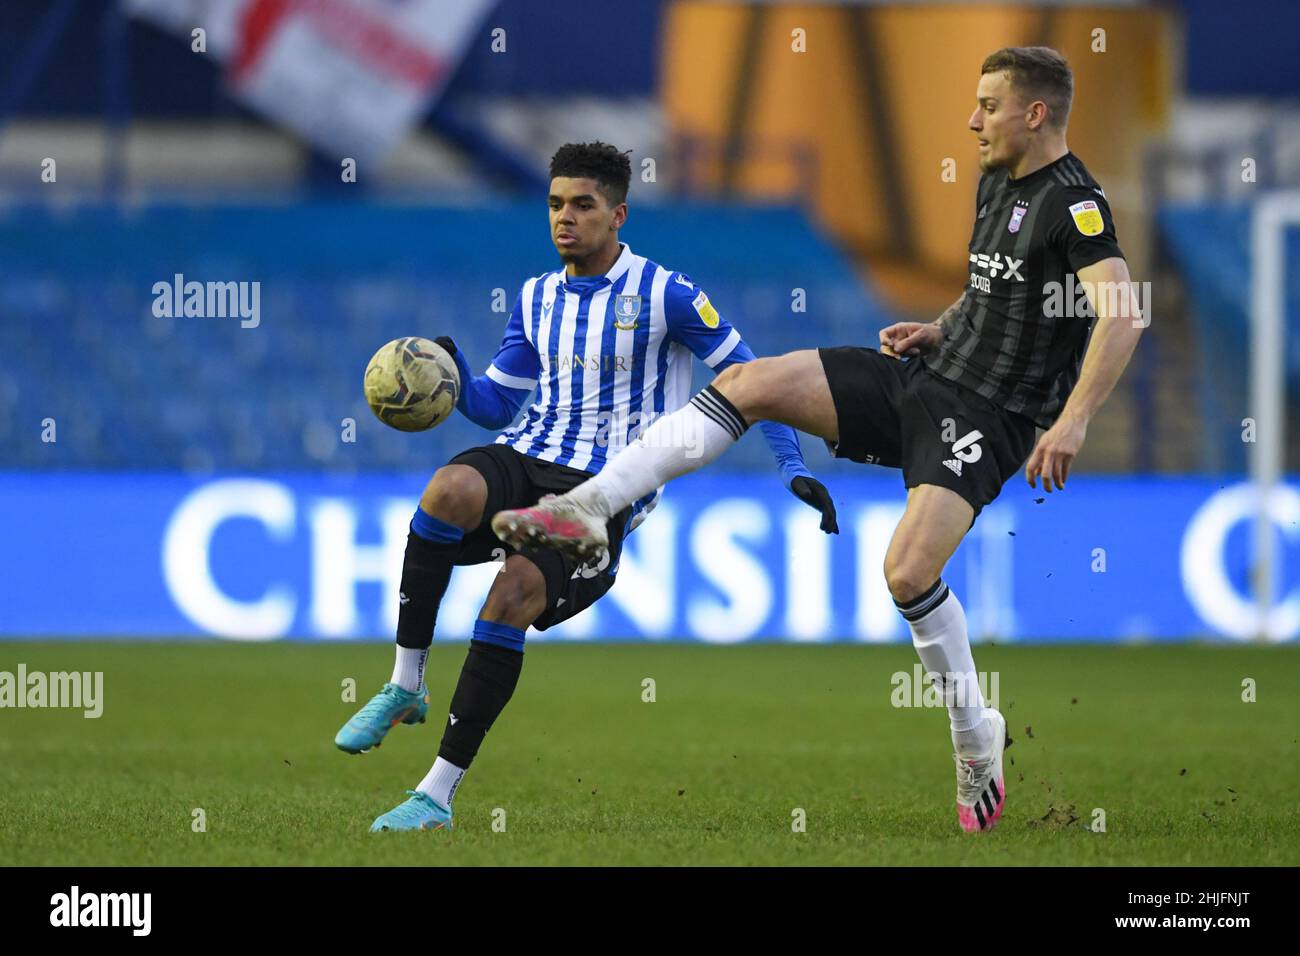 Sheffield, UK. 29th Jan, 2022. Tyreece John-Jules #30 of Sheffield Wednesday competes with Luke Woolfenden #6 of Ipswich Town for the ball in Sheffield, United Kingdom on 1/29/2022. (Photo by Simon Whitehead/News Images/Sipa USA) Credit: Sipa USA/Alamy Live News Stock Photo